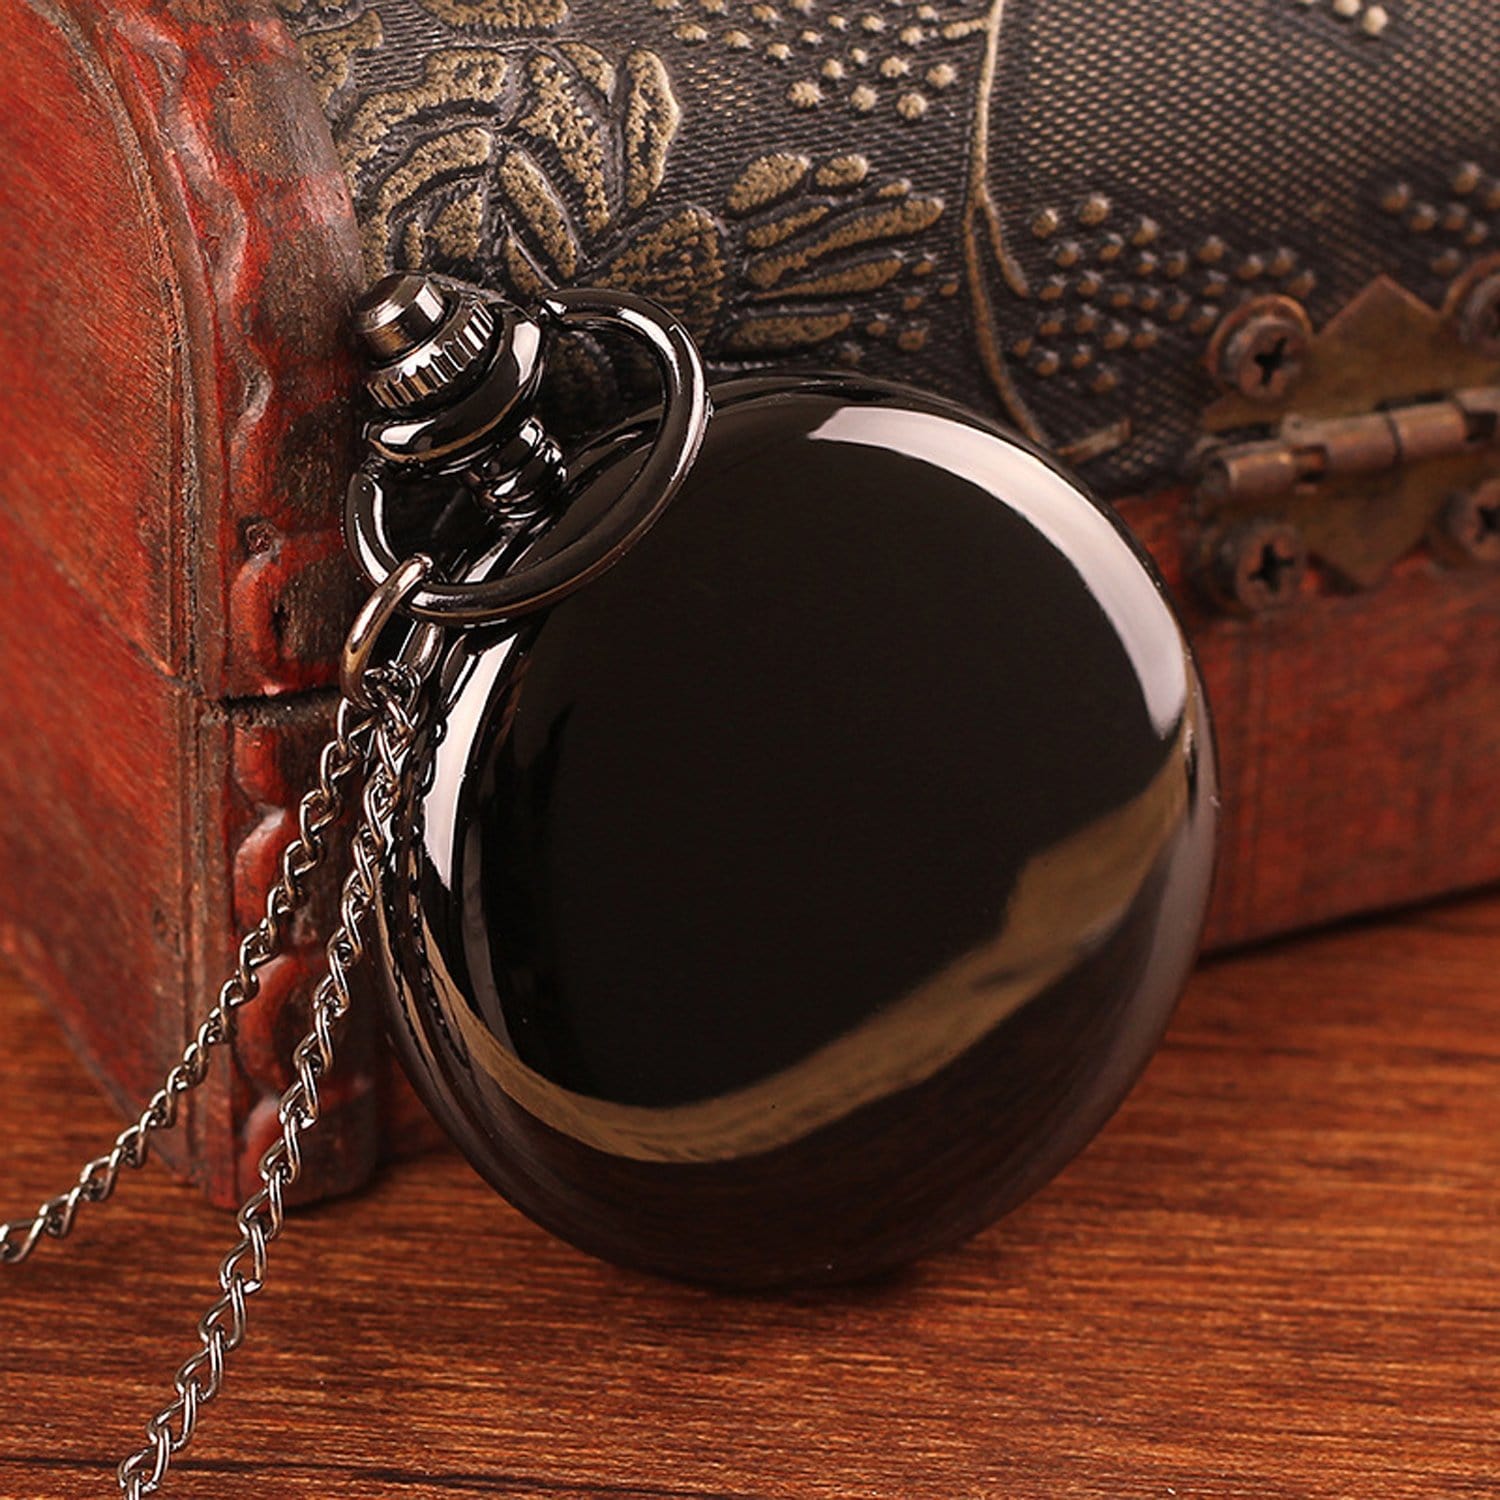 Pocket Watches To My Husband - You Are My Soulmate Pocket Watch GiveMe-Gifts